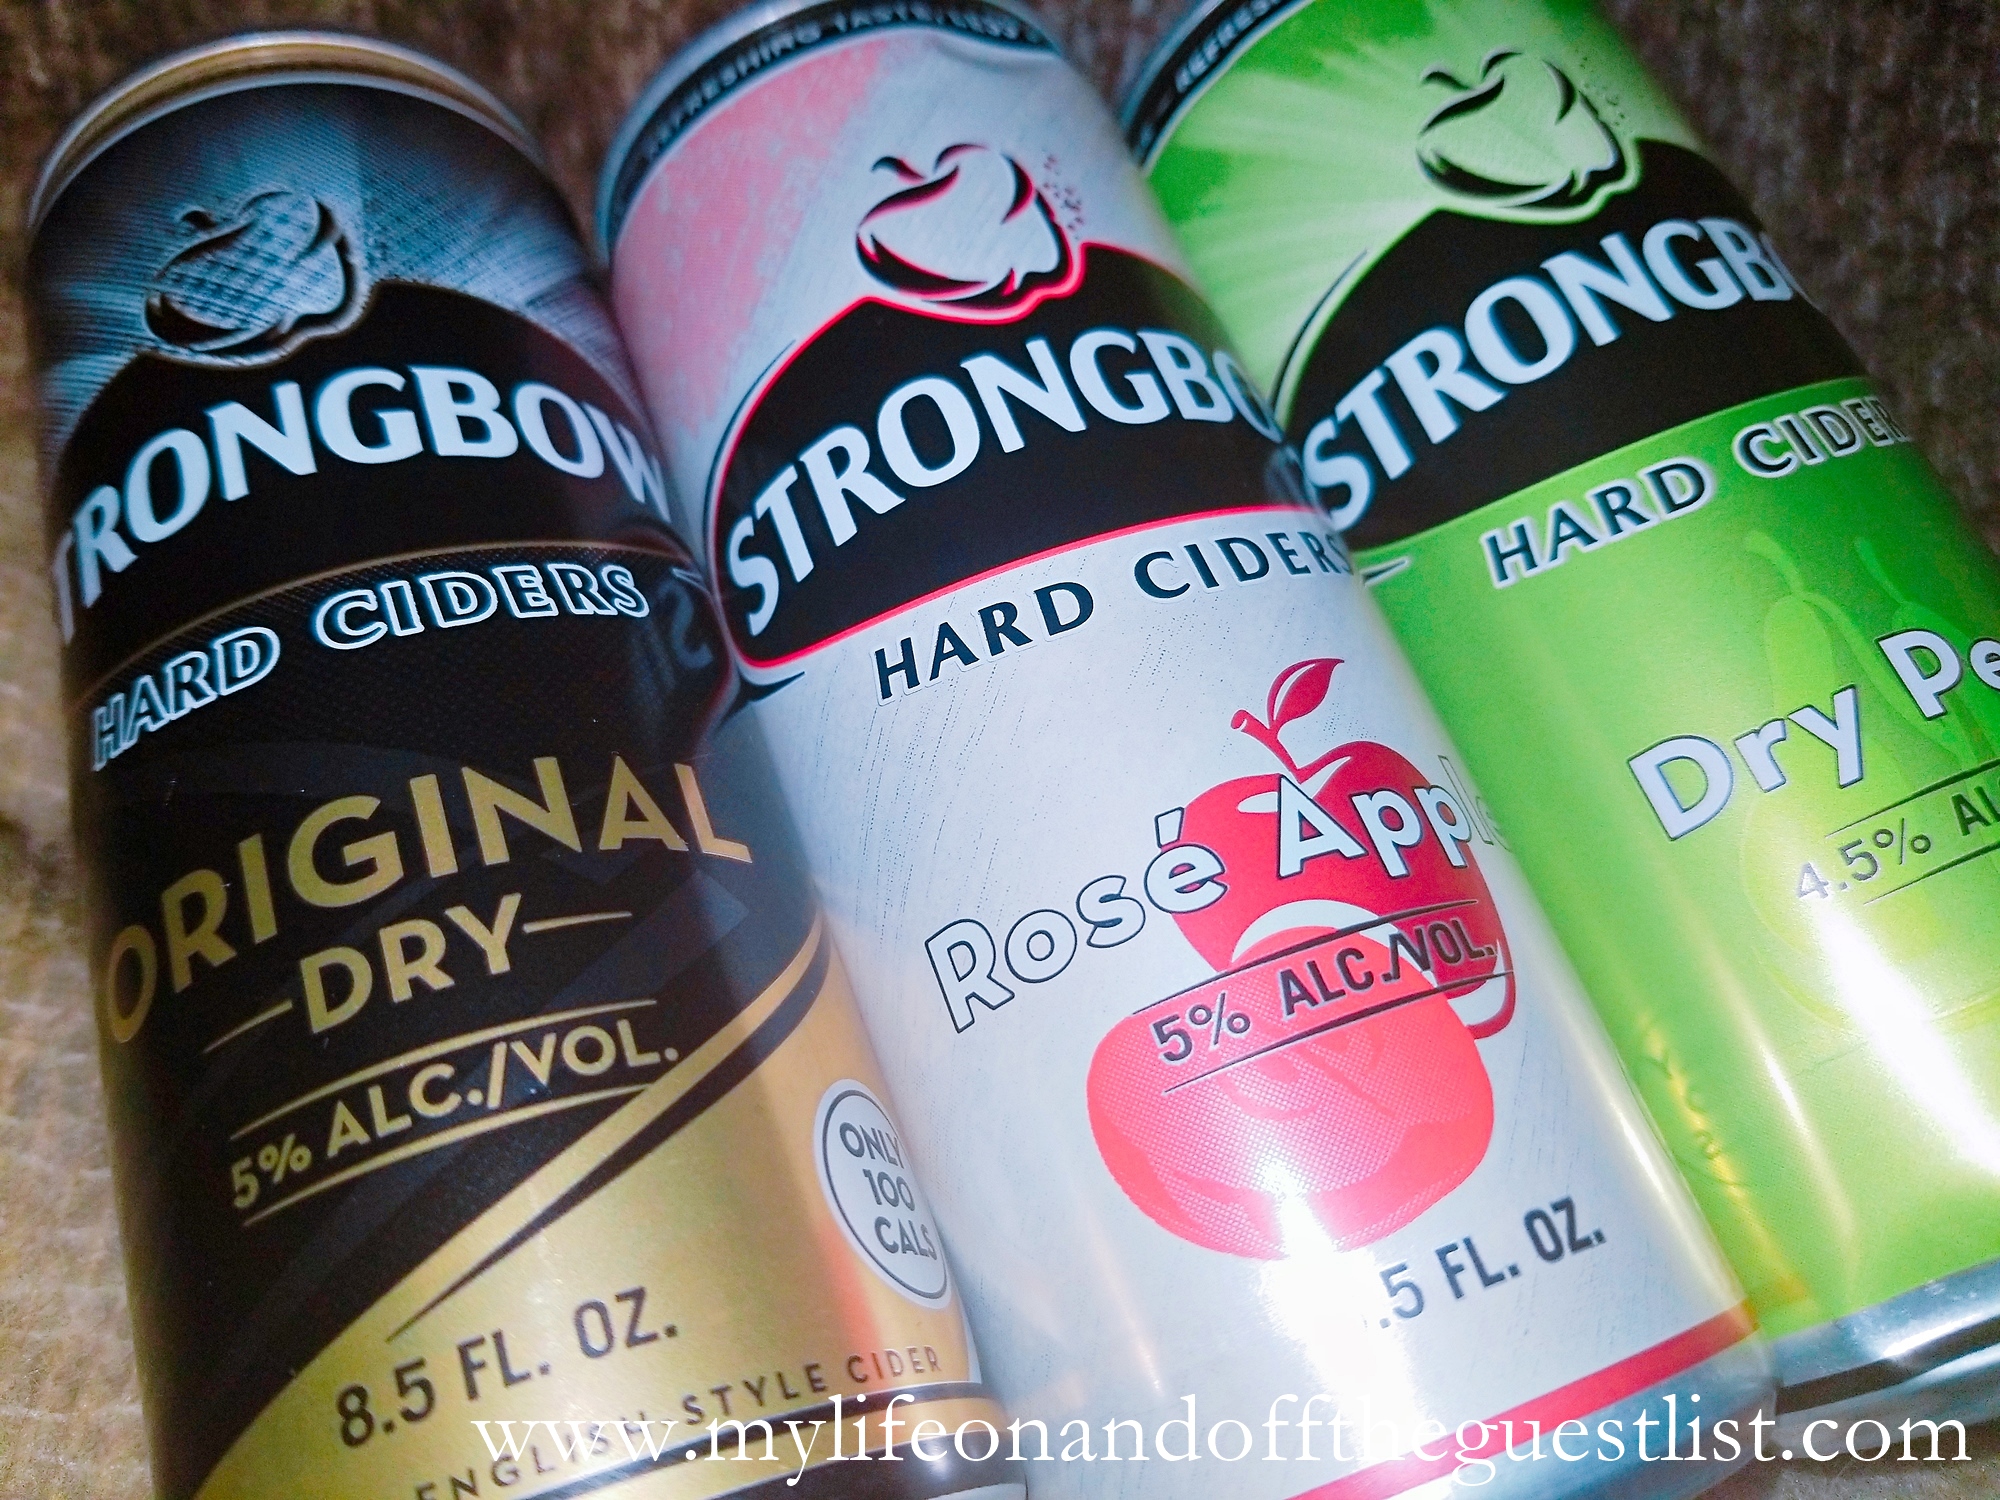 STRONGBOW® HARD CIDERS 100-CAL SLIM CANS